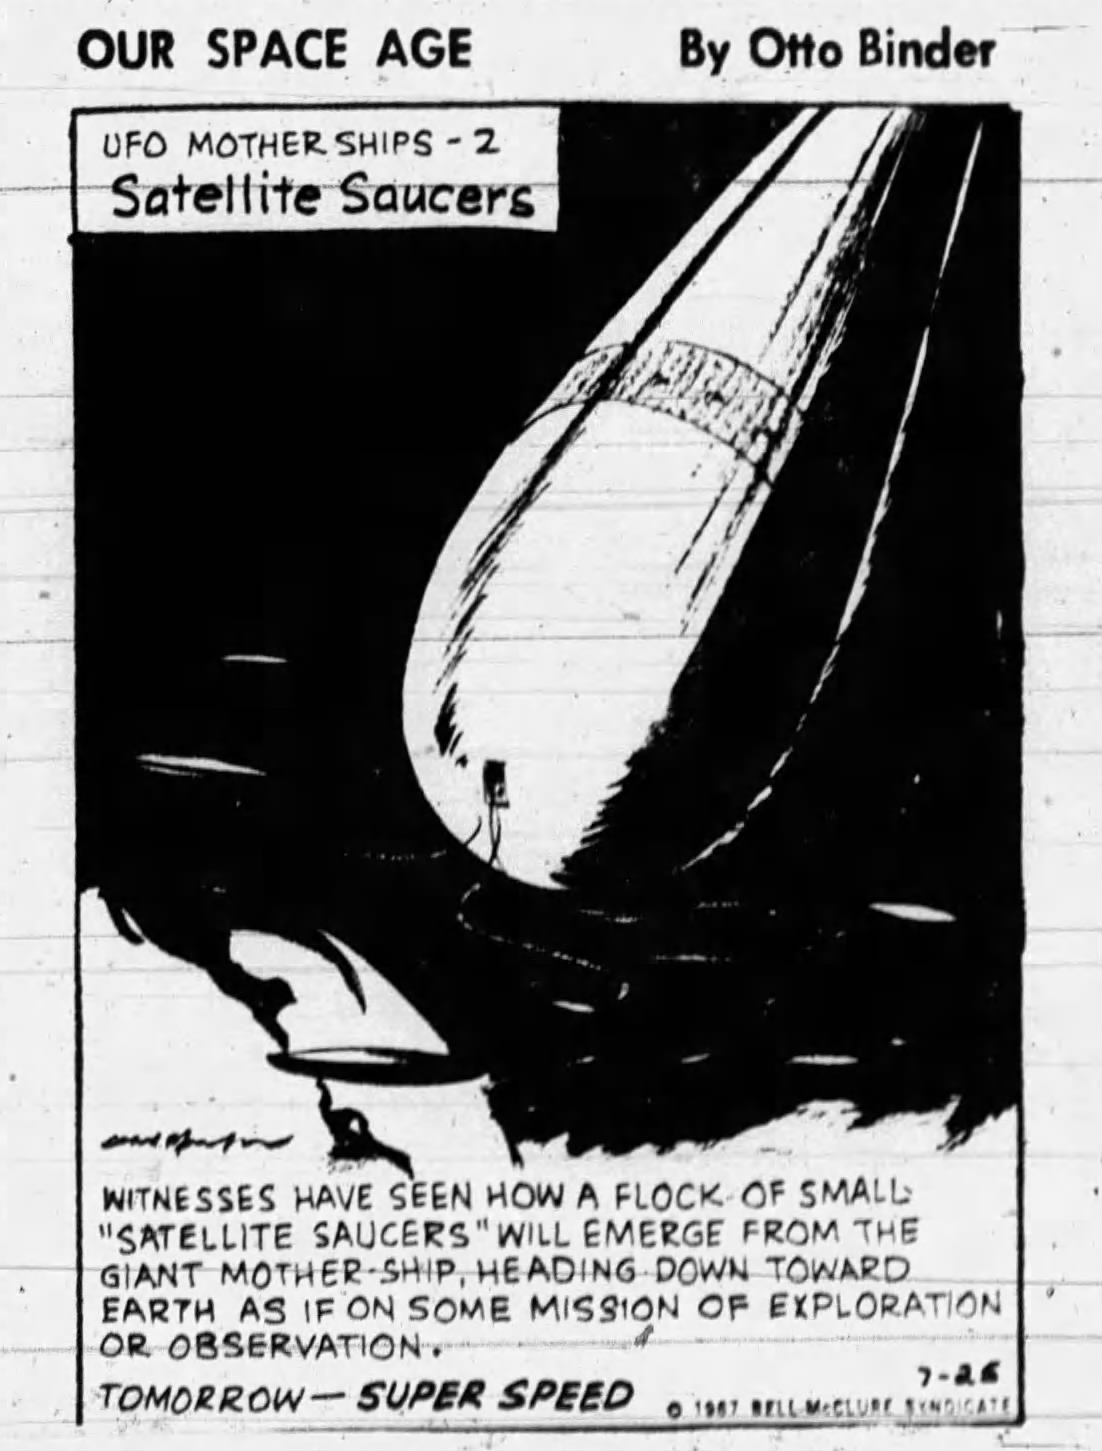 Our_Space_Age__07_25_67__UFO_Mother_Ships_2.jpg